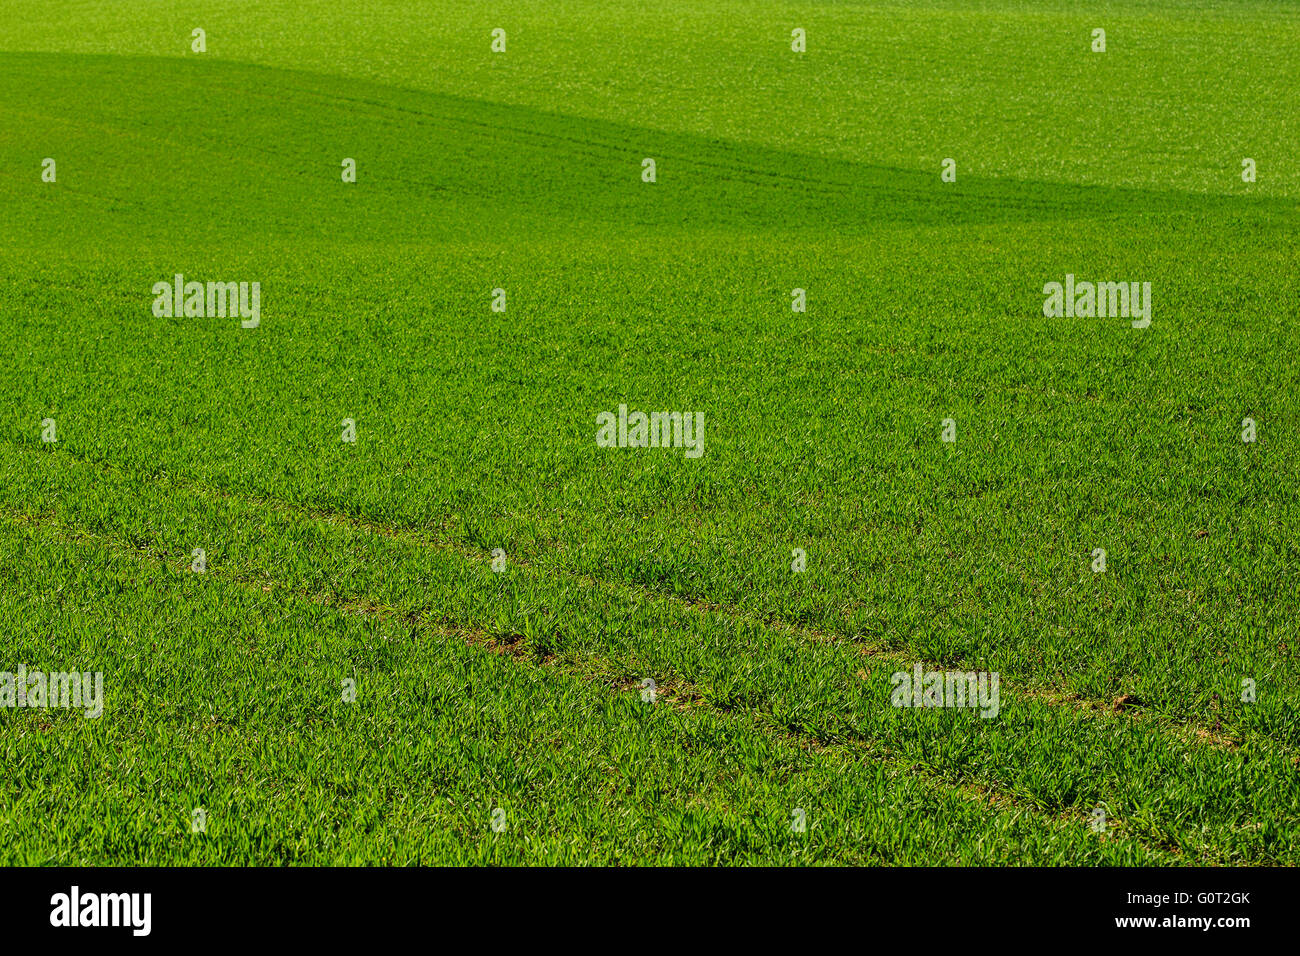 Cultivated land with nice looking grass. Stock Photo